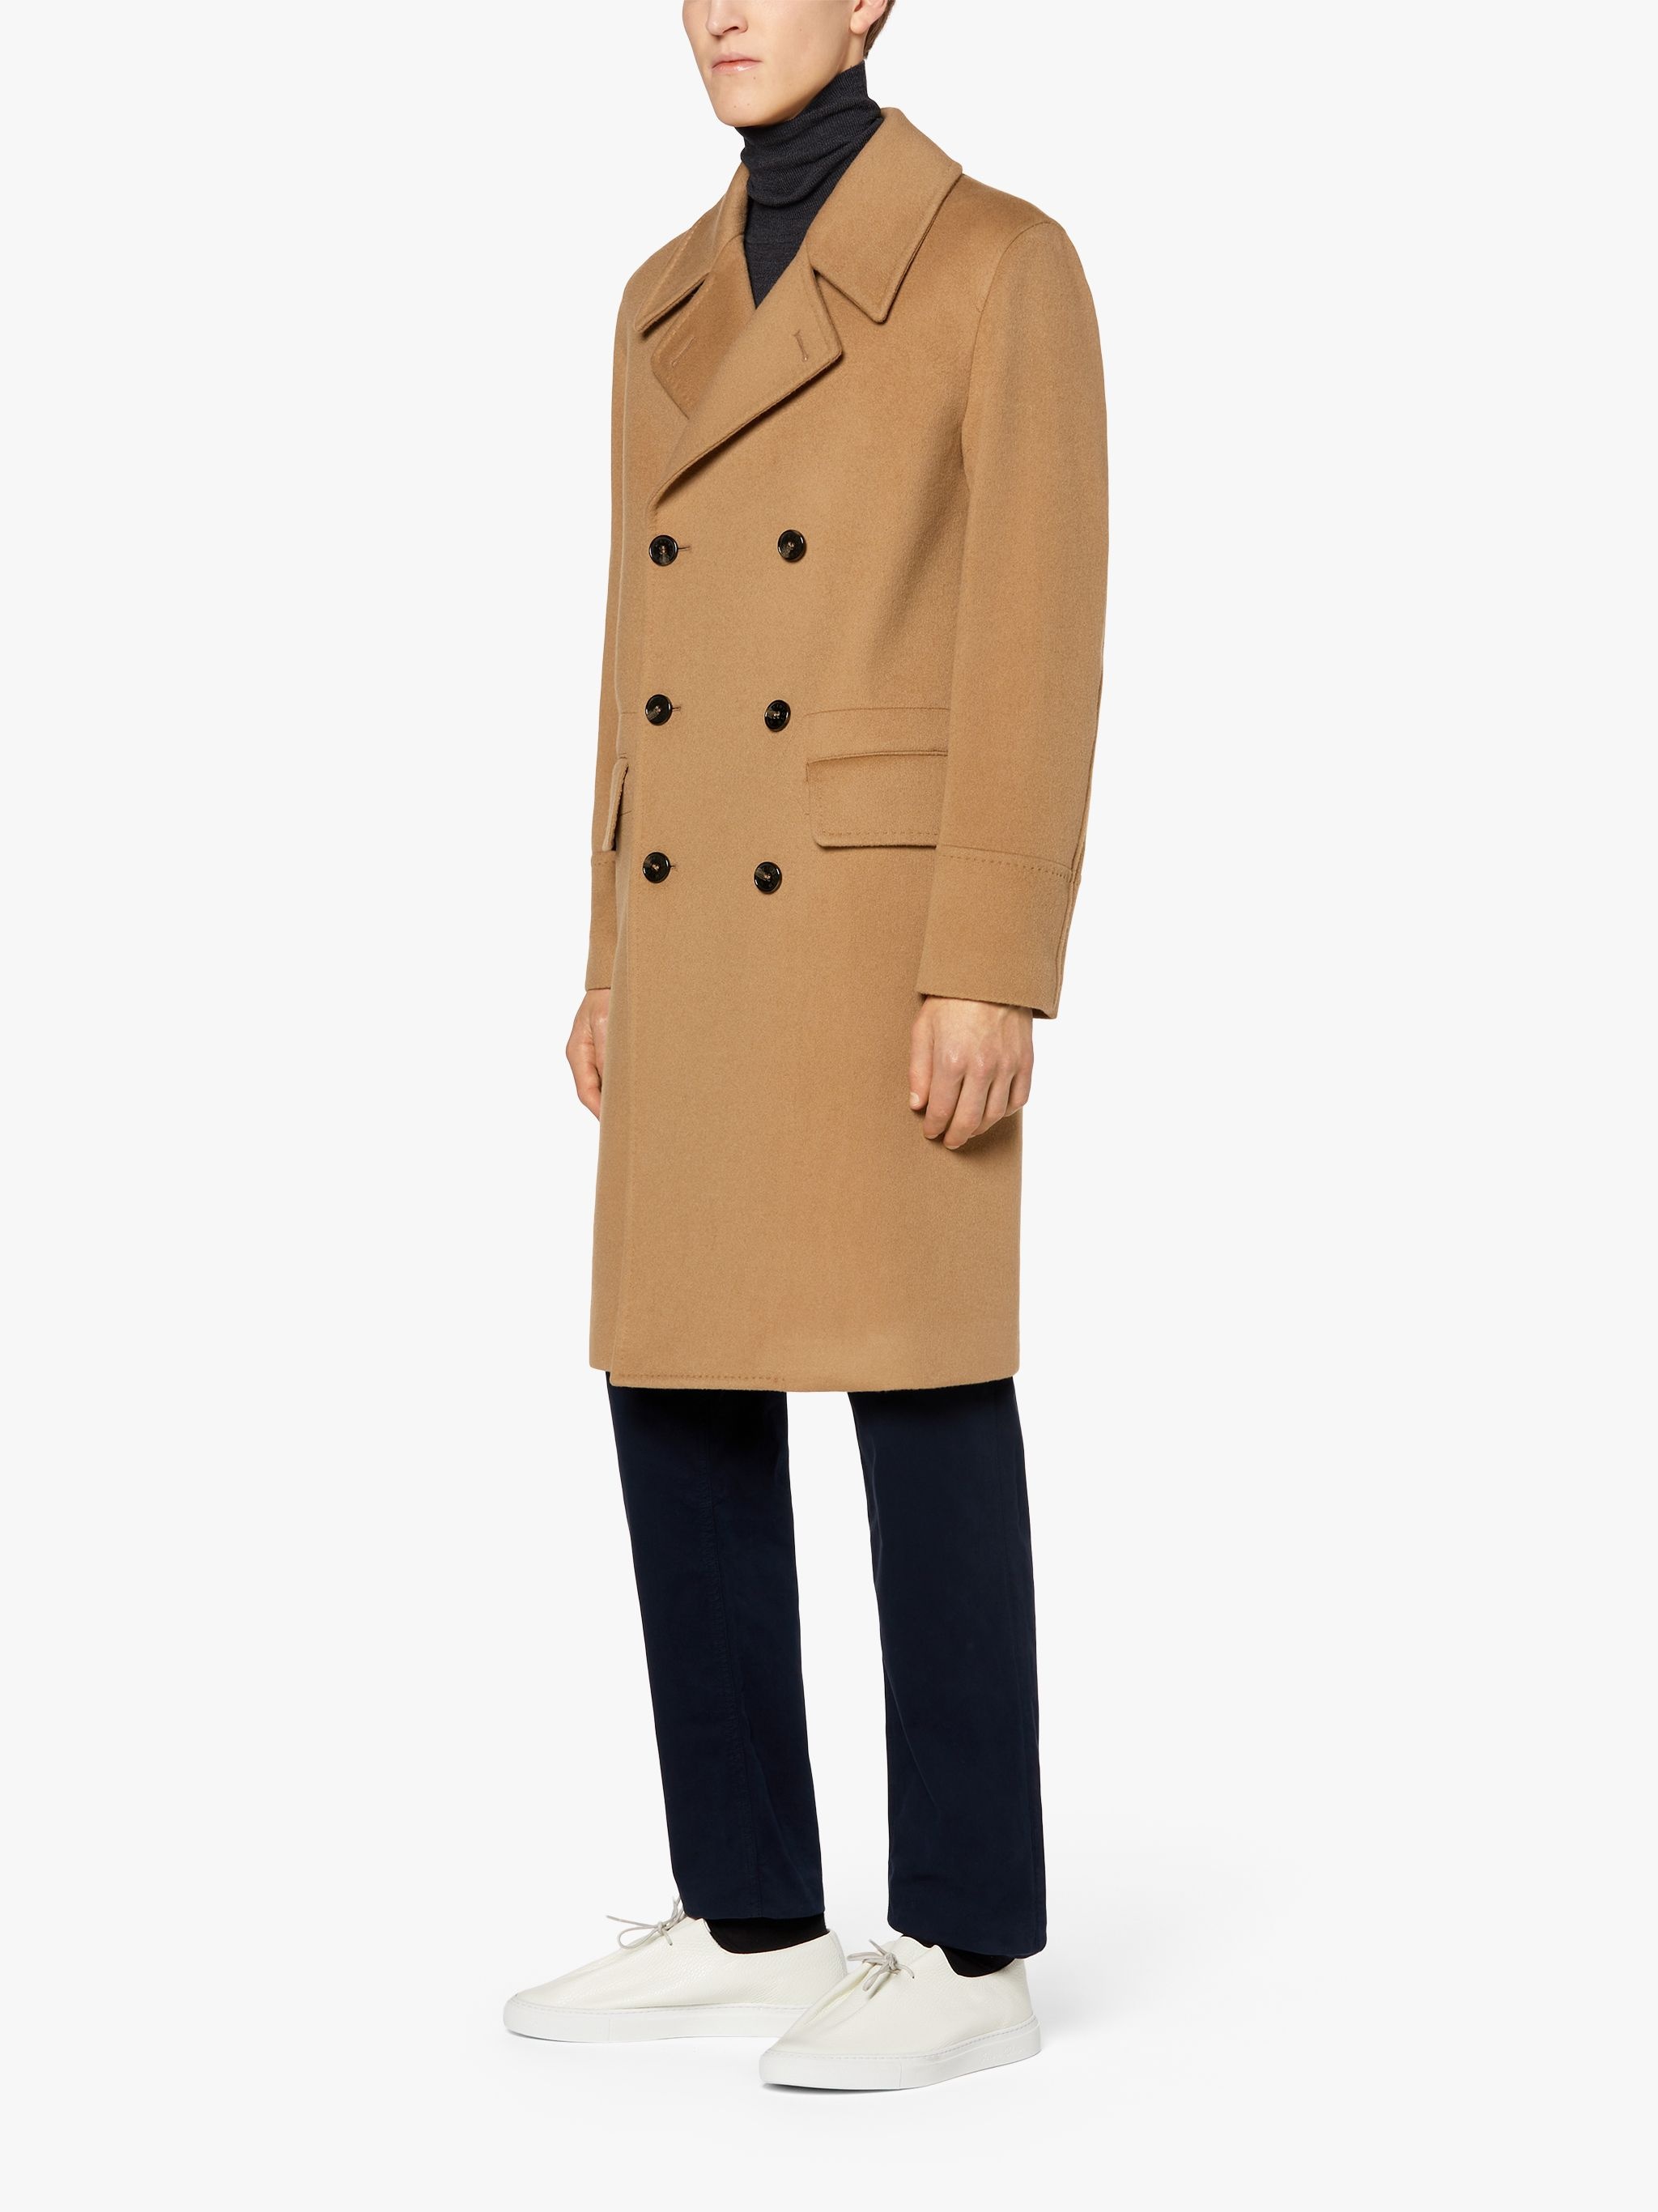 REDFORD BEIGE WOOL & CASHMERE DOUBLE BREASTED COAT | GM-1101 - 4